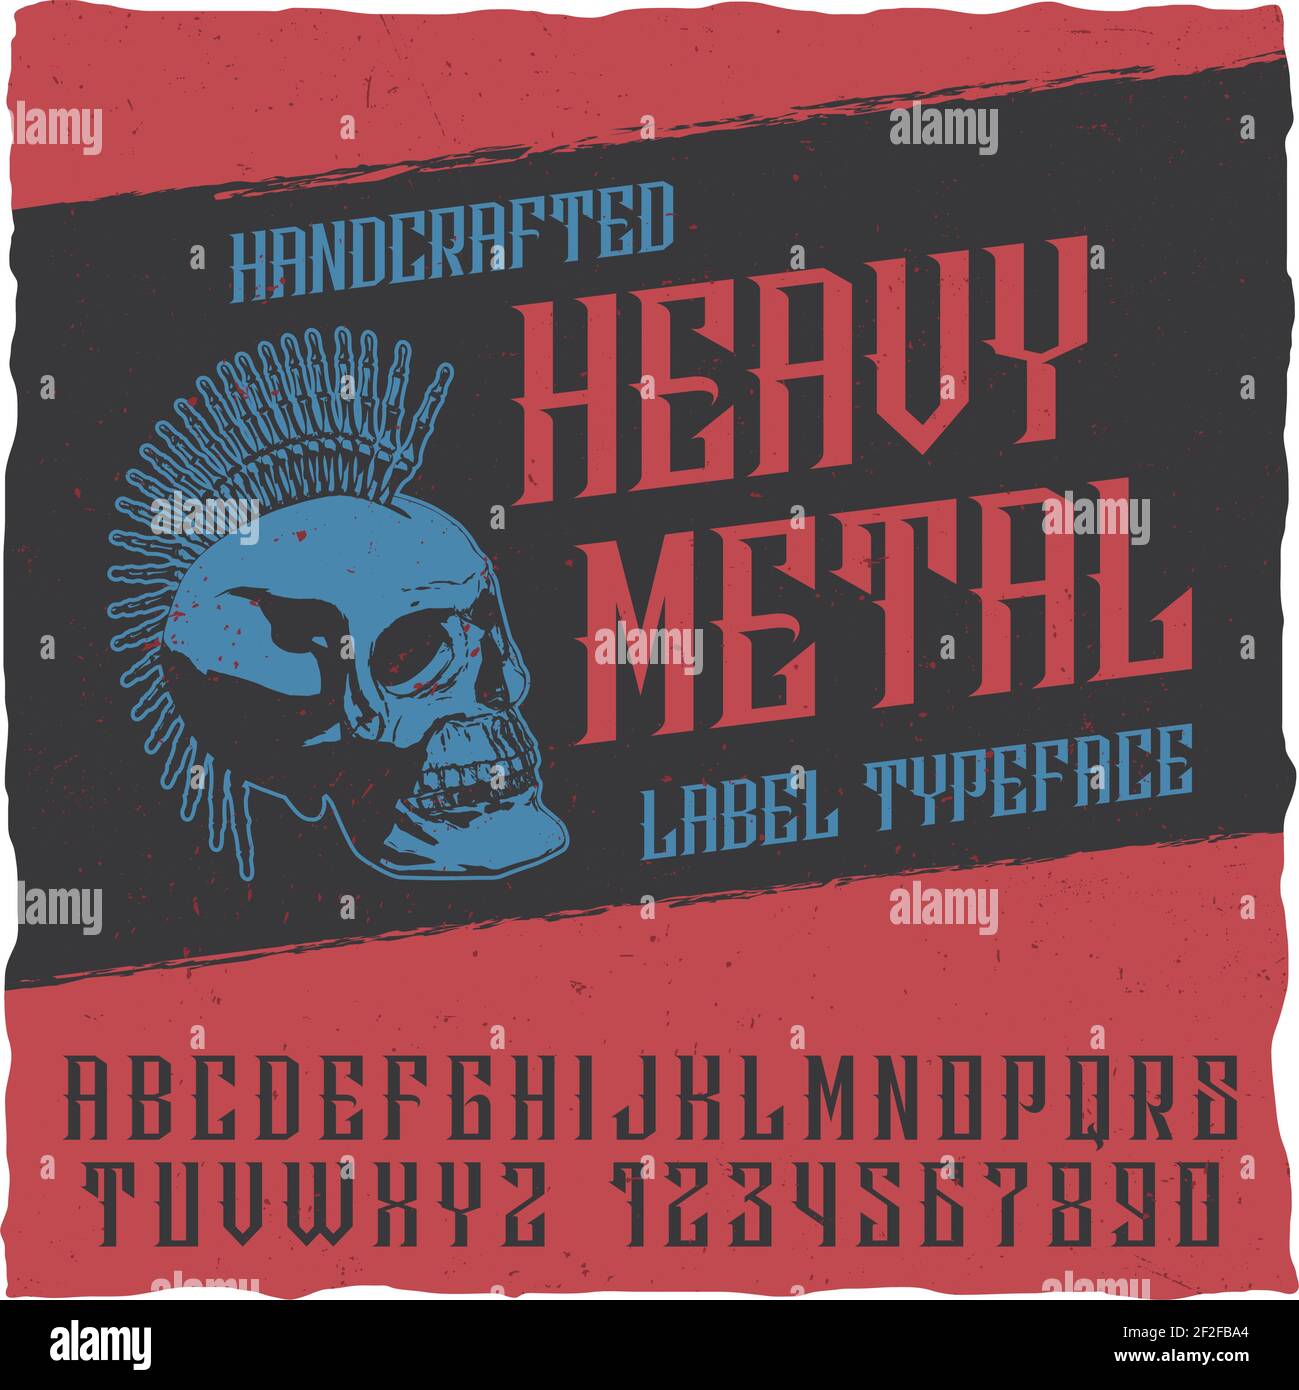 Heavy metal label typeface poster with sceleton on the black background vector illustration Stock Vector